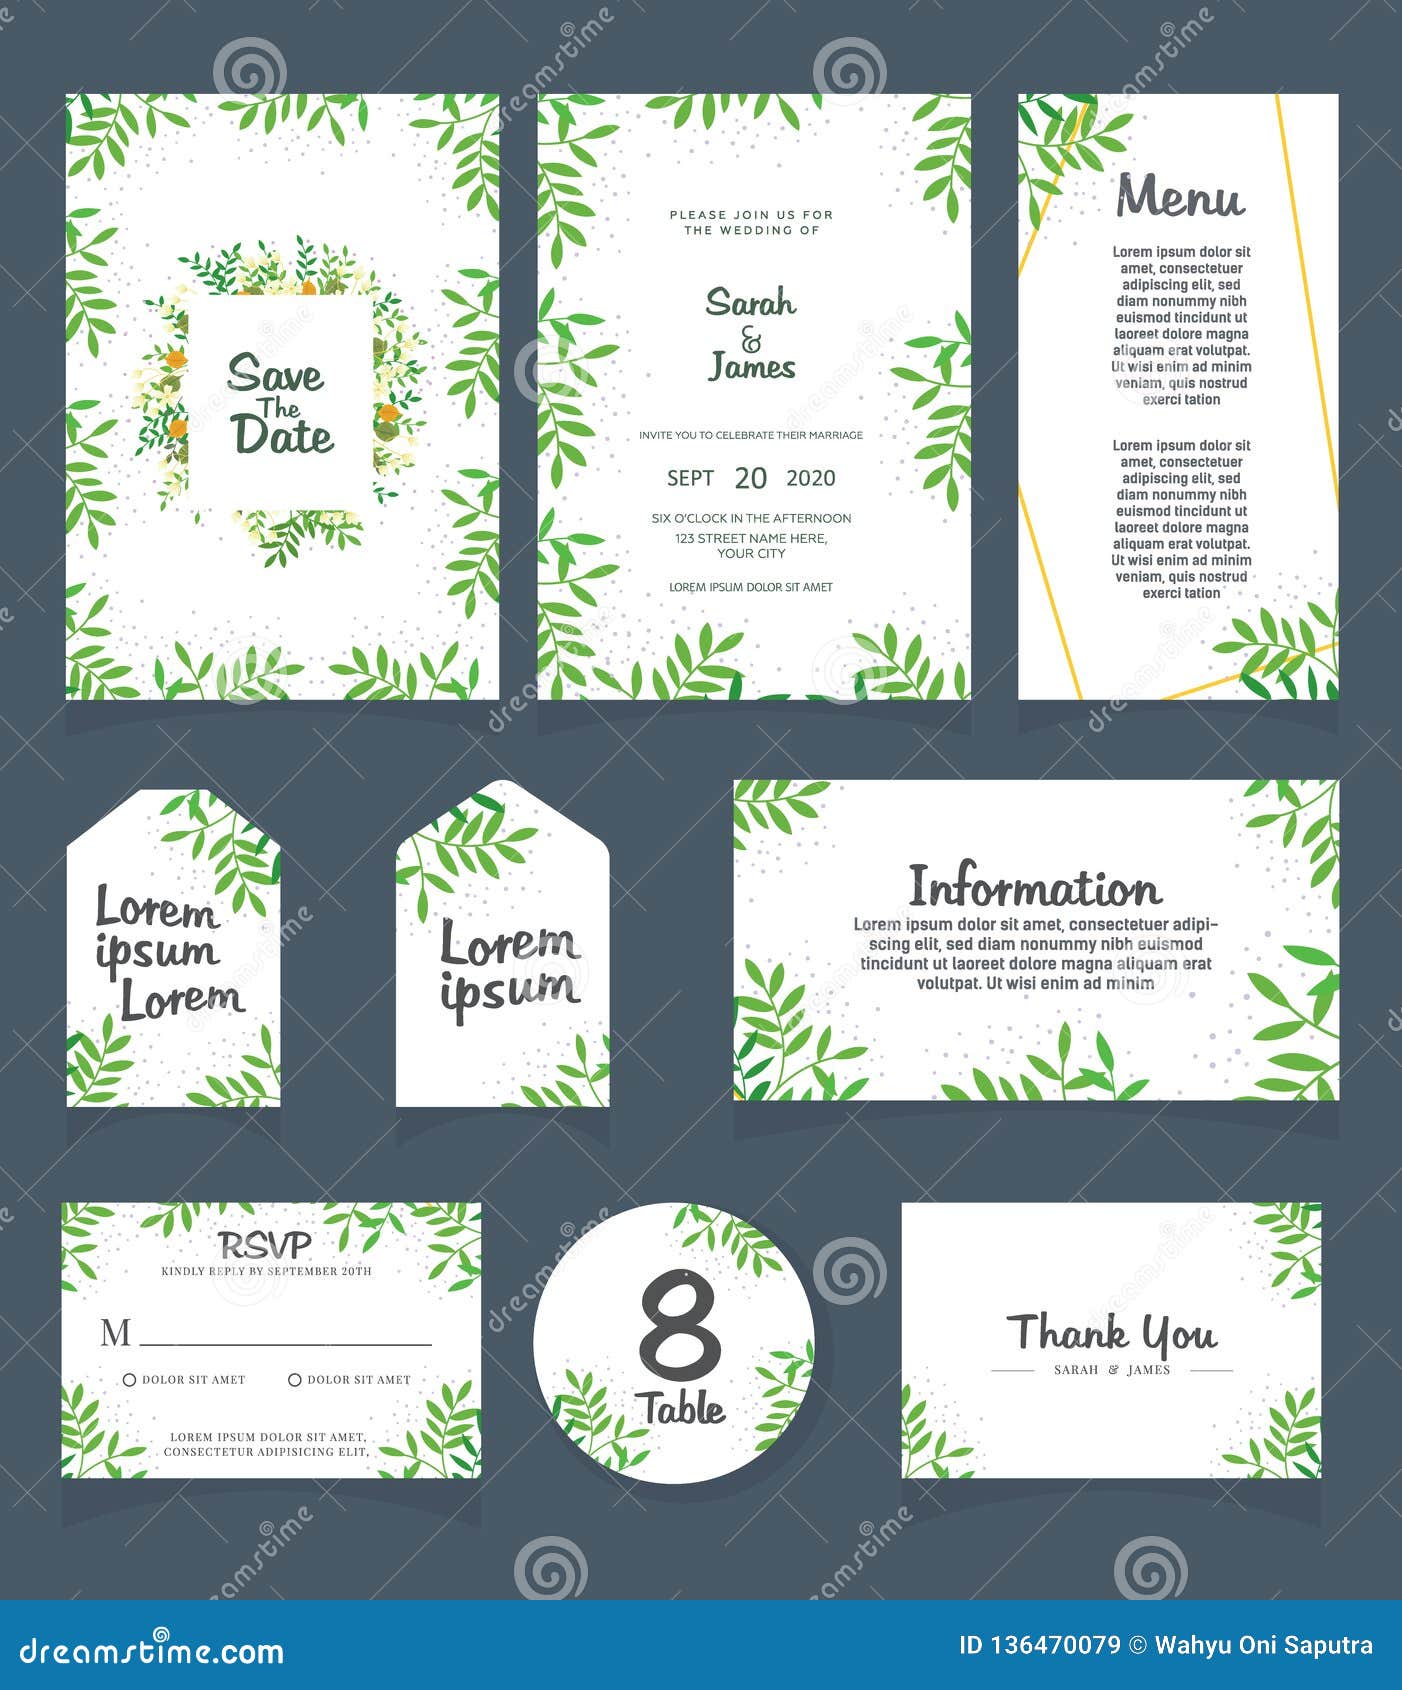 Wedding Invitation Card Template. Wedding Invitation, Thank You Inside Table Place Card Template Free Download